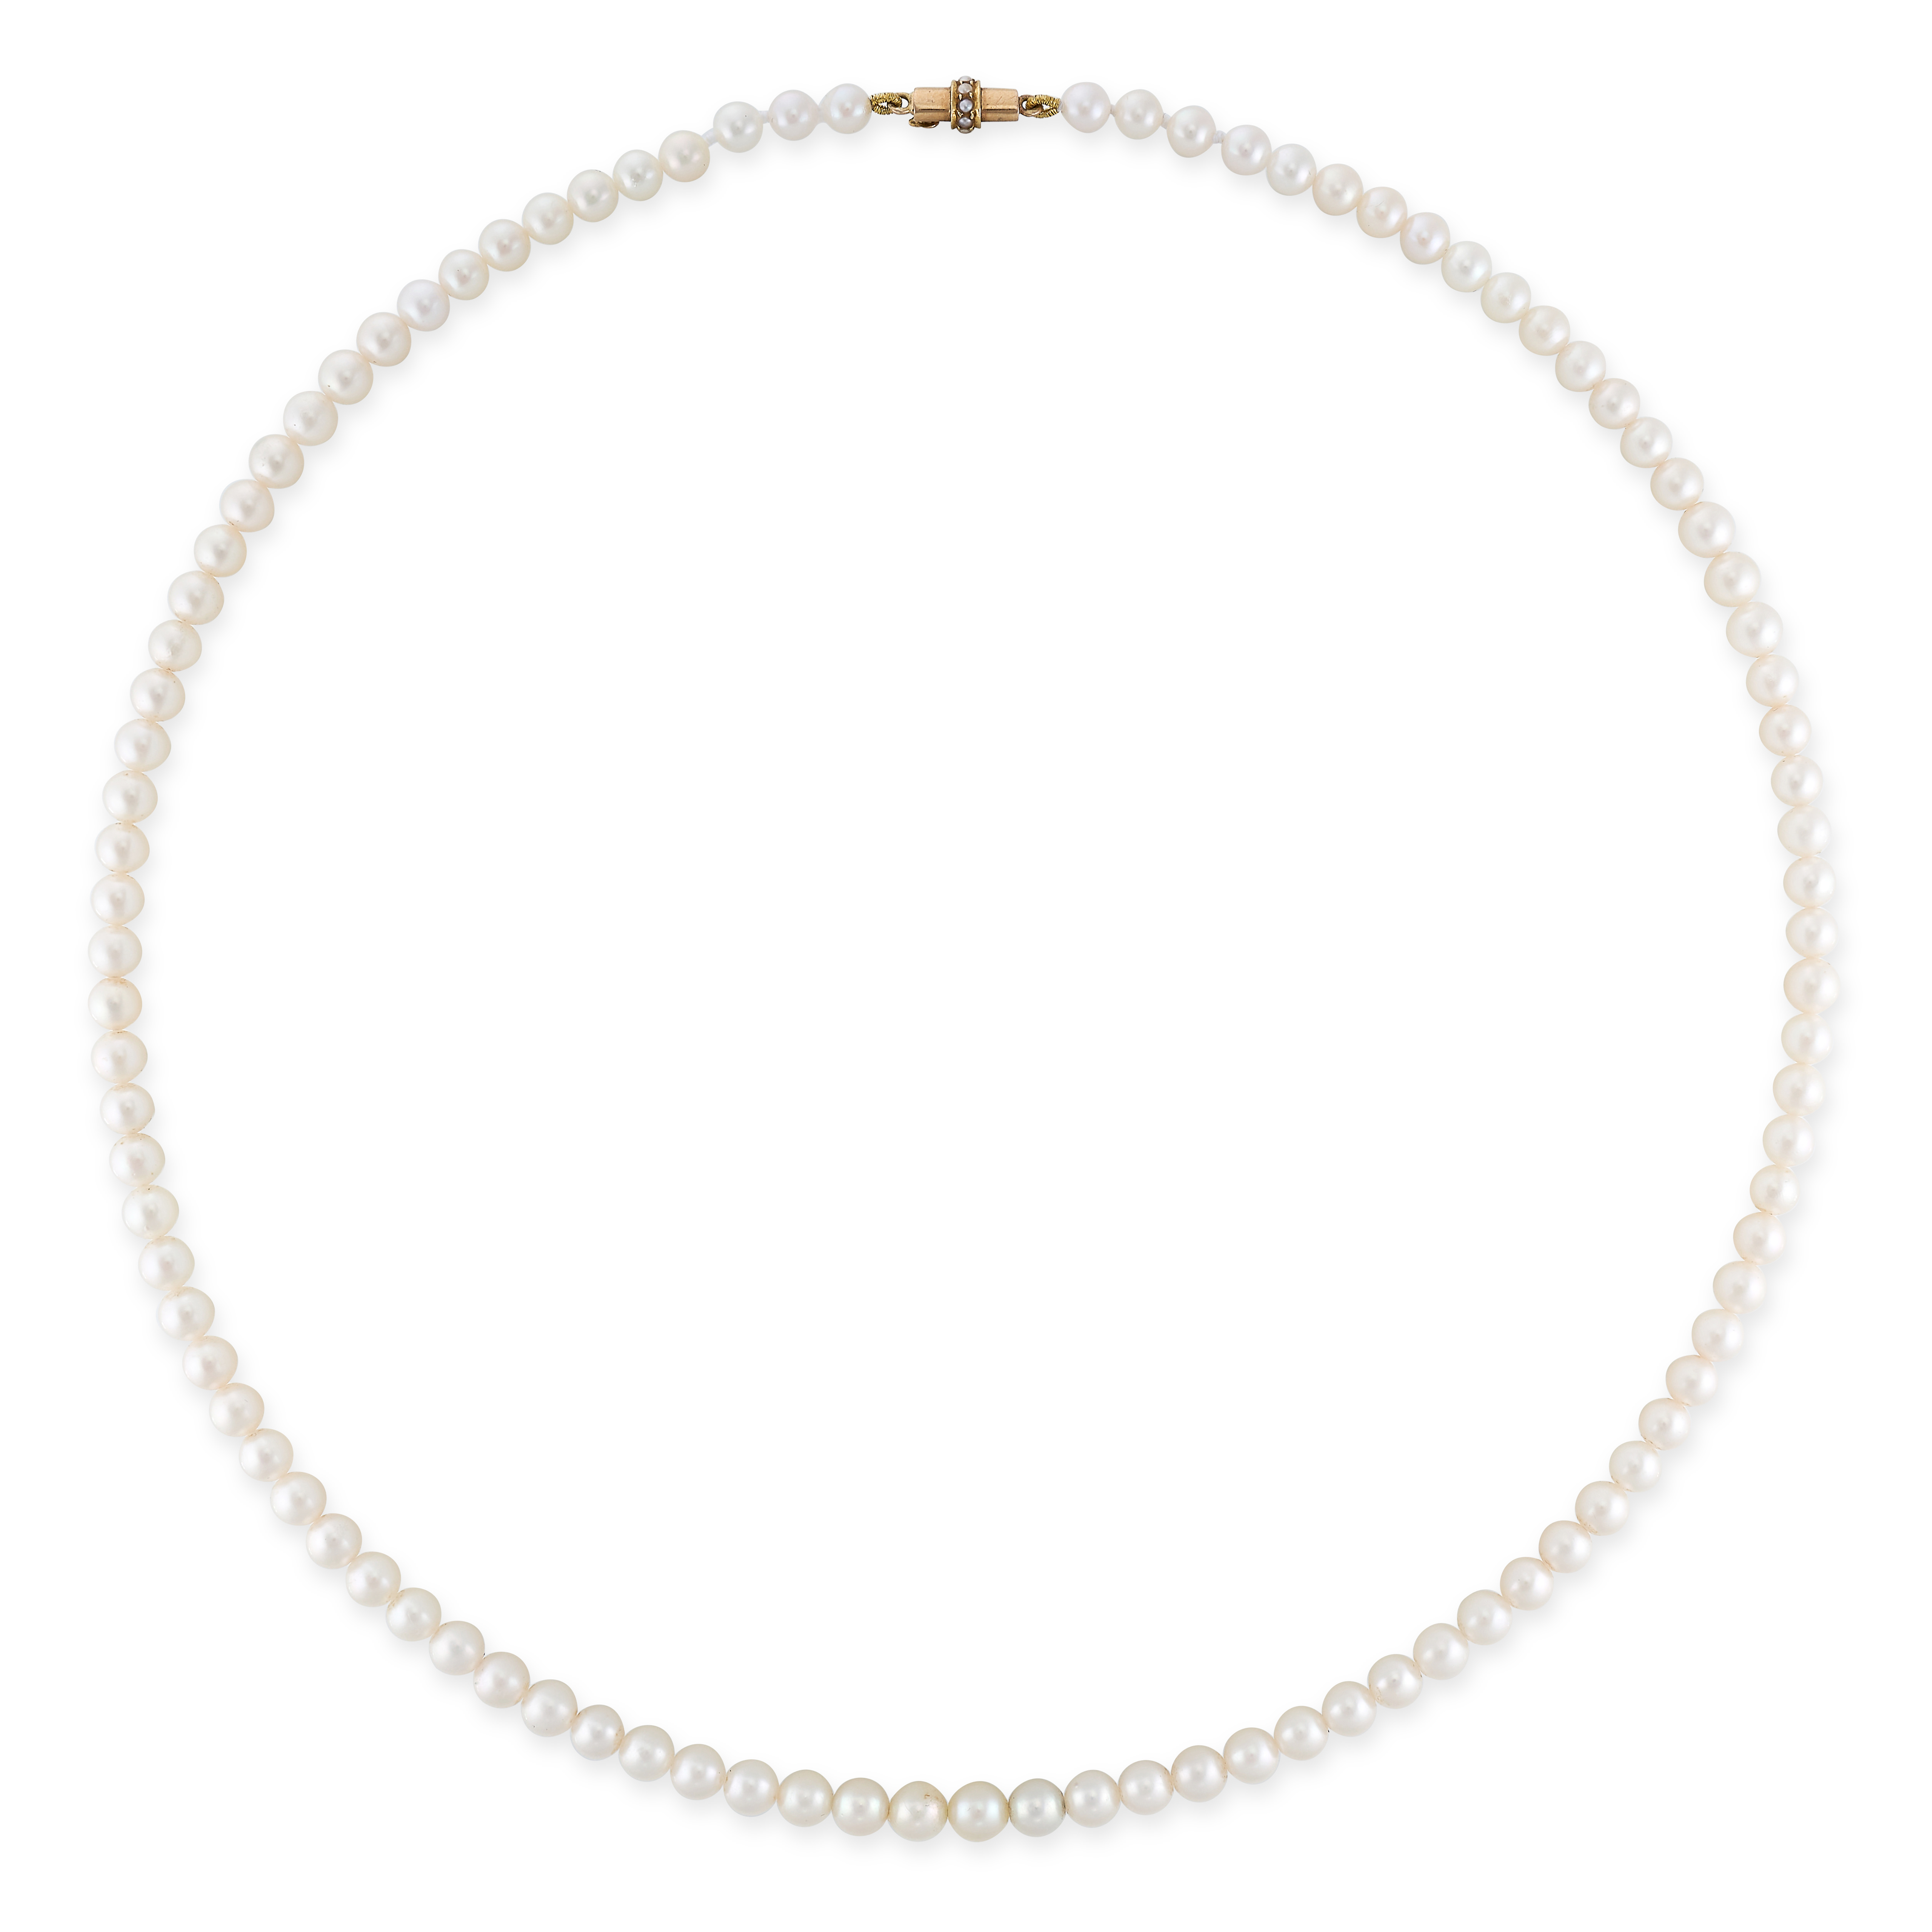 A PEARL NECKLACE in yellow gold, comprising a single row of sixty-seven graduated pearls ranging 4.